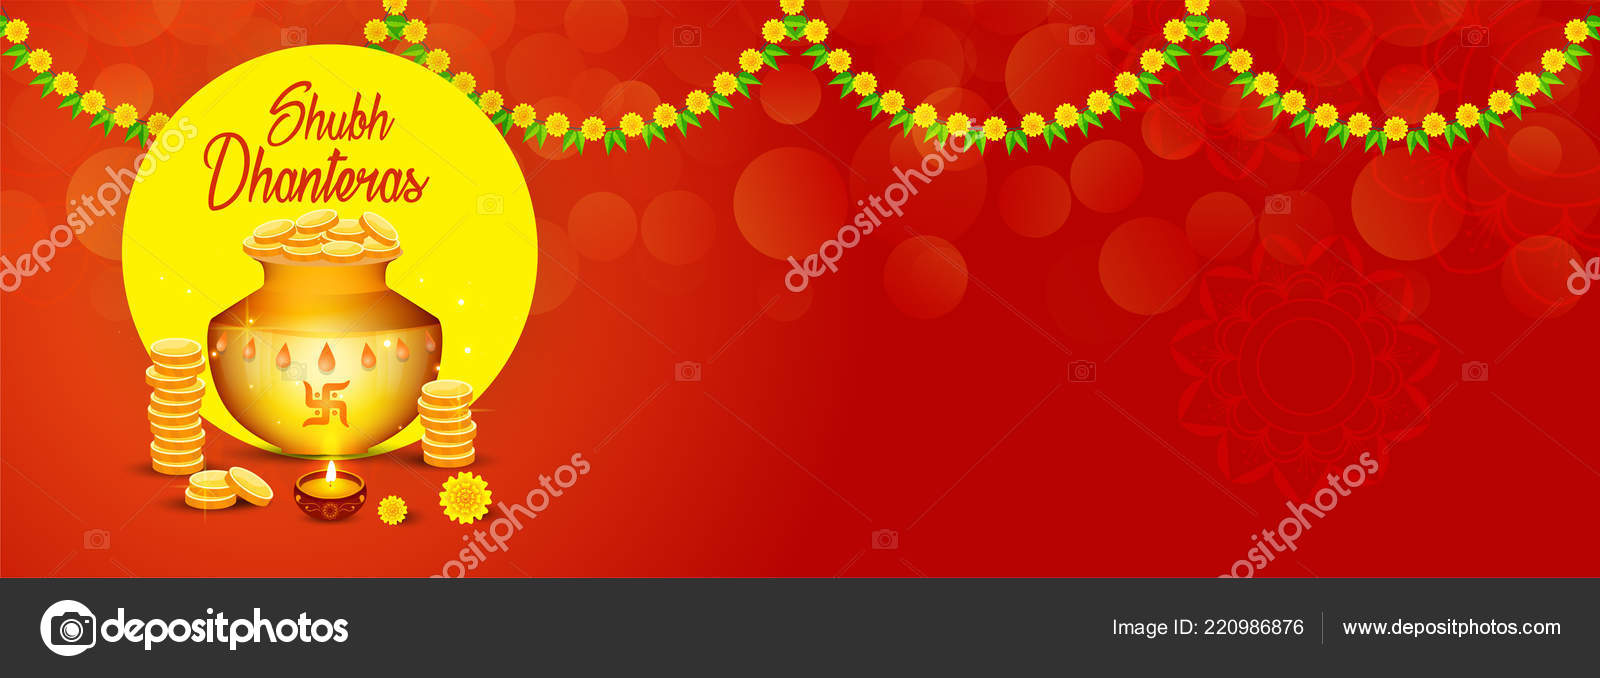 Happy Dhanteras Images For Banners - 1600x678 Wallpaper 